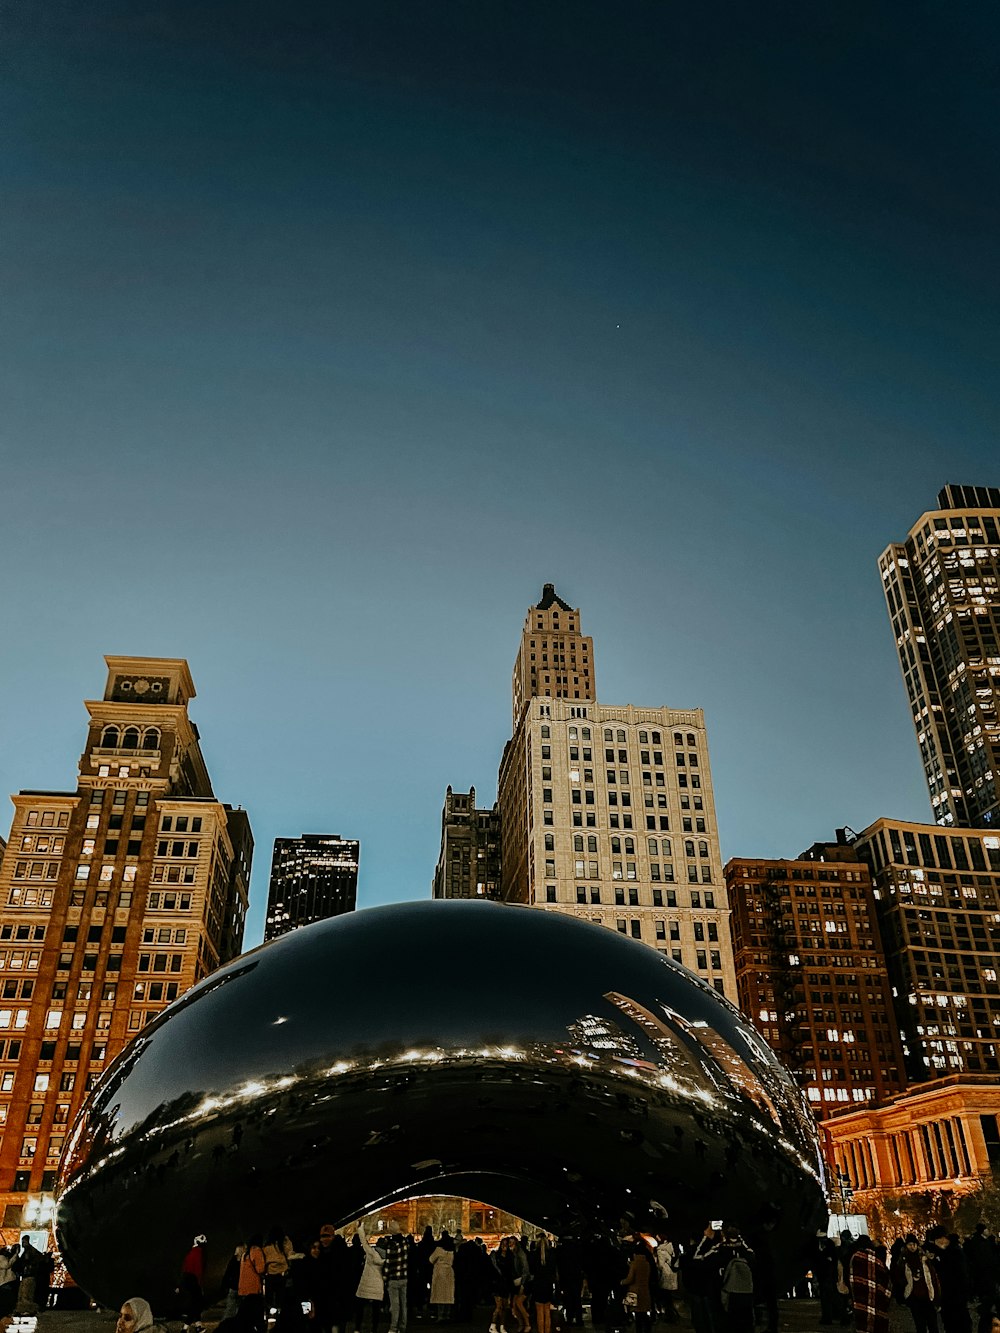 a large black object in the middle of a city